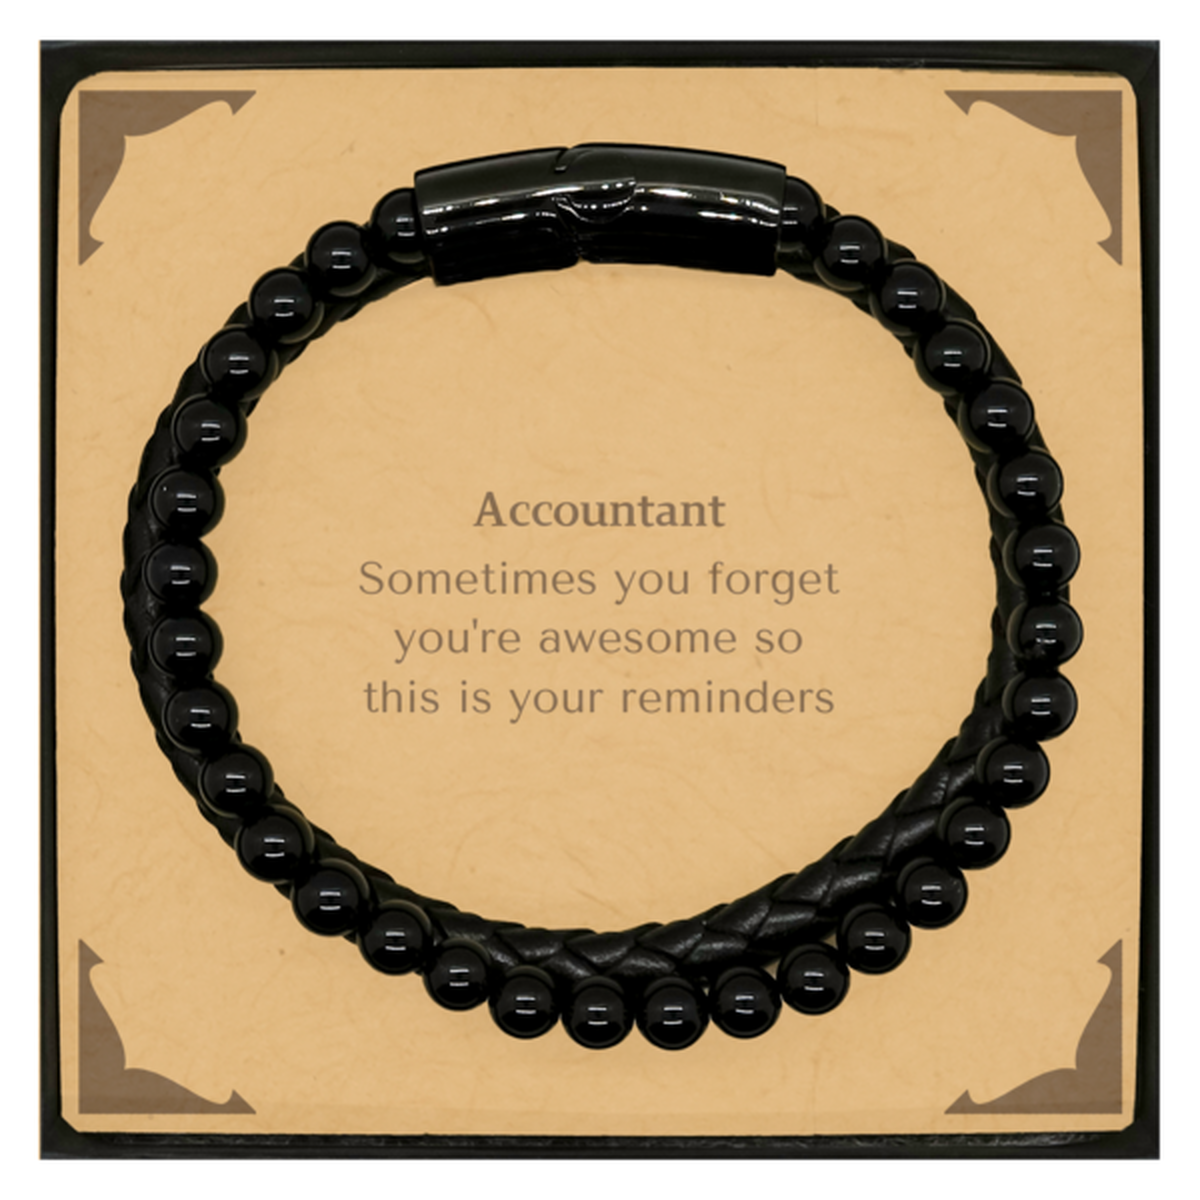 Sentimental Accountant Stone Leather Bracelets, Accountant Sometimes you forget you're awesome so this is your reminders, Graduation Christmas Birthday Gifts for Accountant, Men, Women, Coworkers